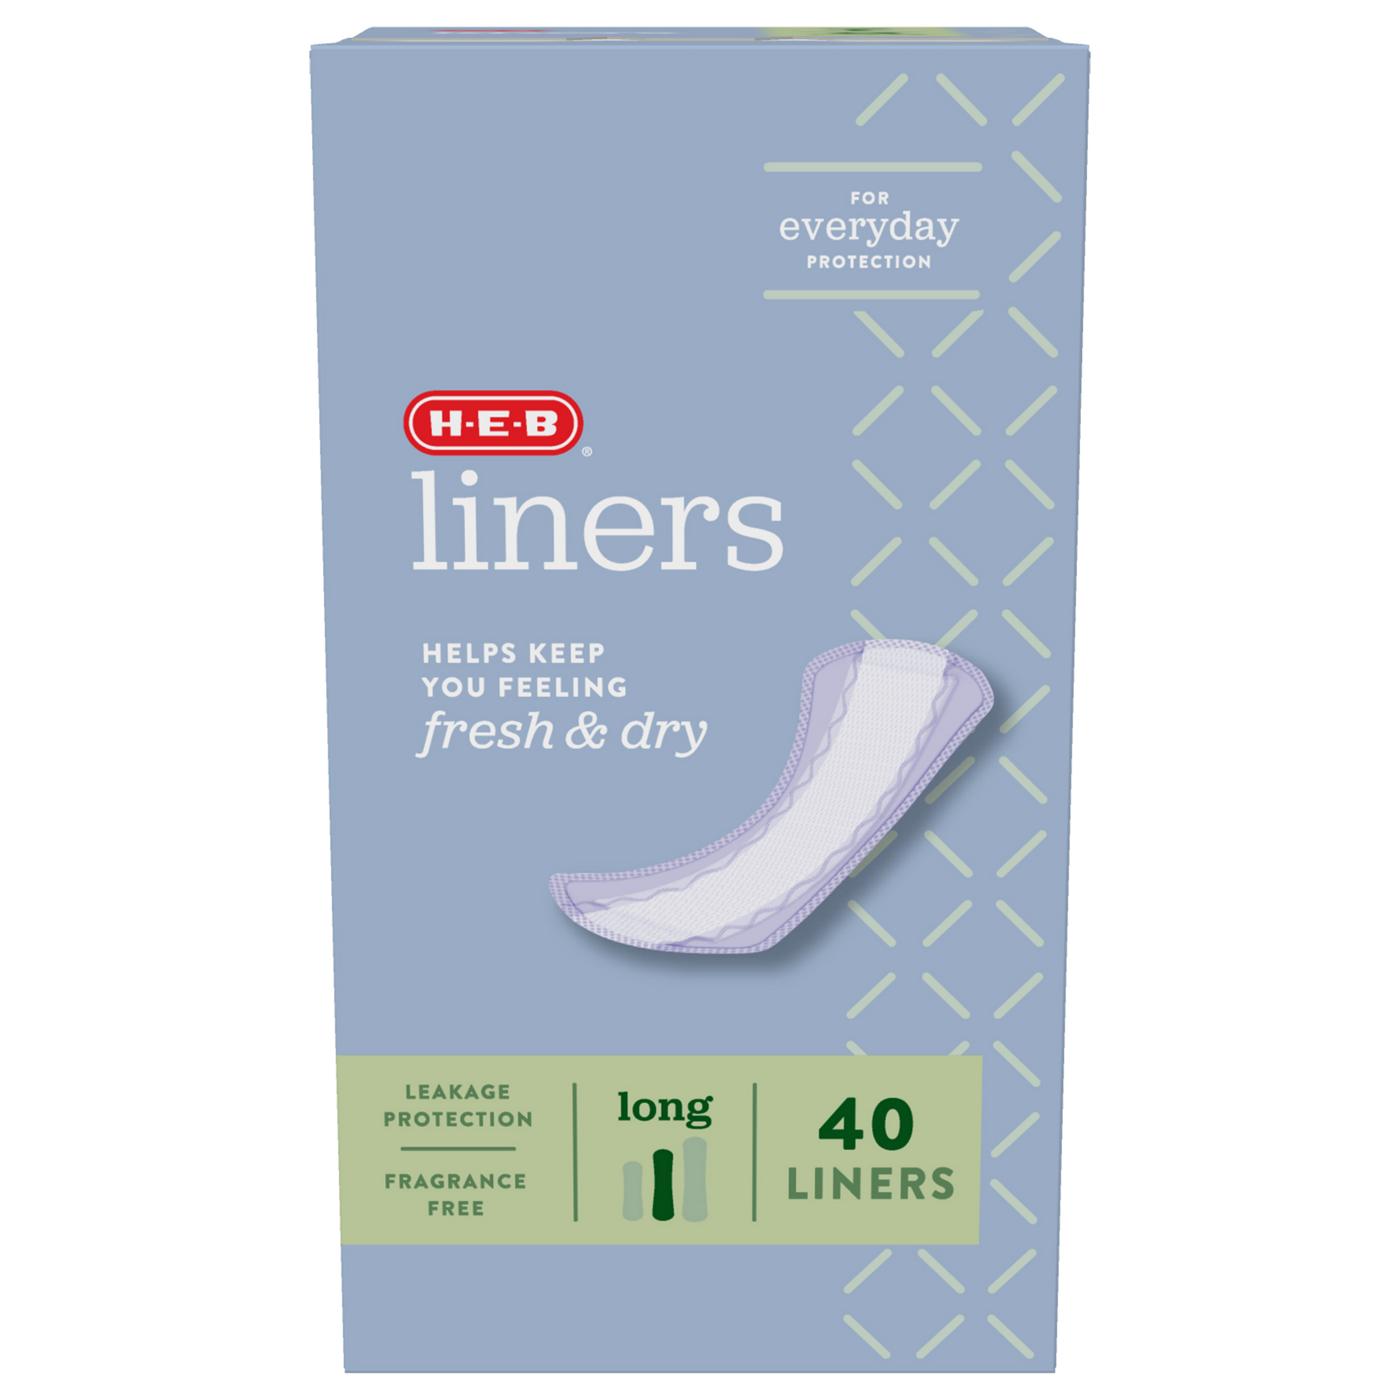 H-E-B Liners - Long; image 1 of 2